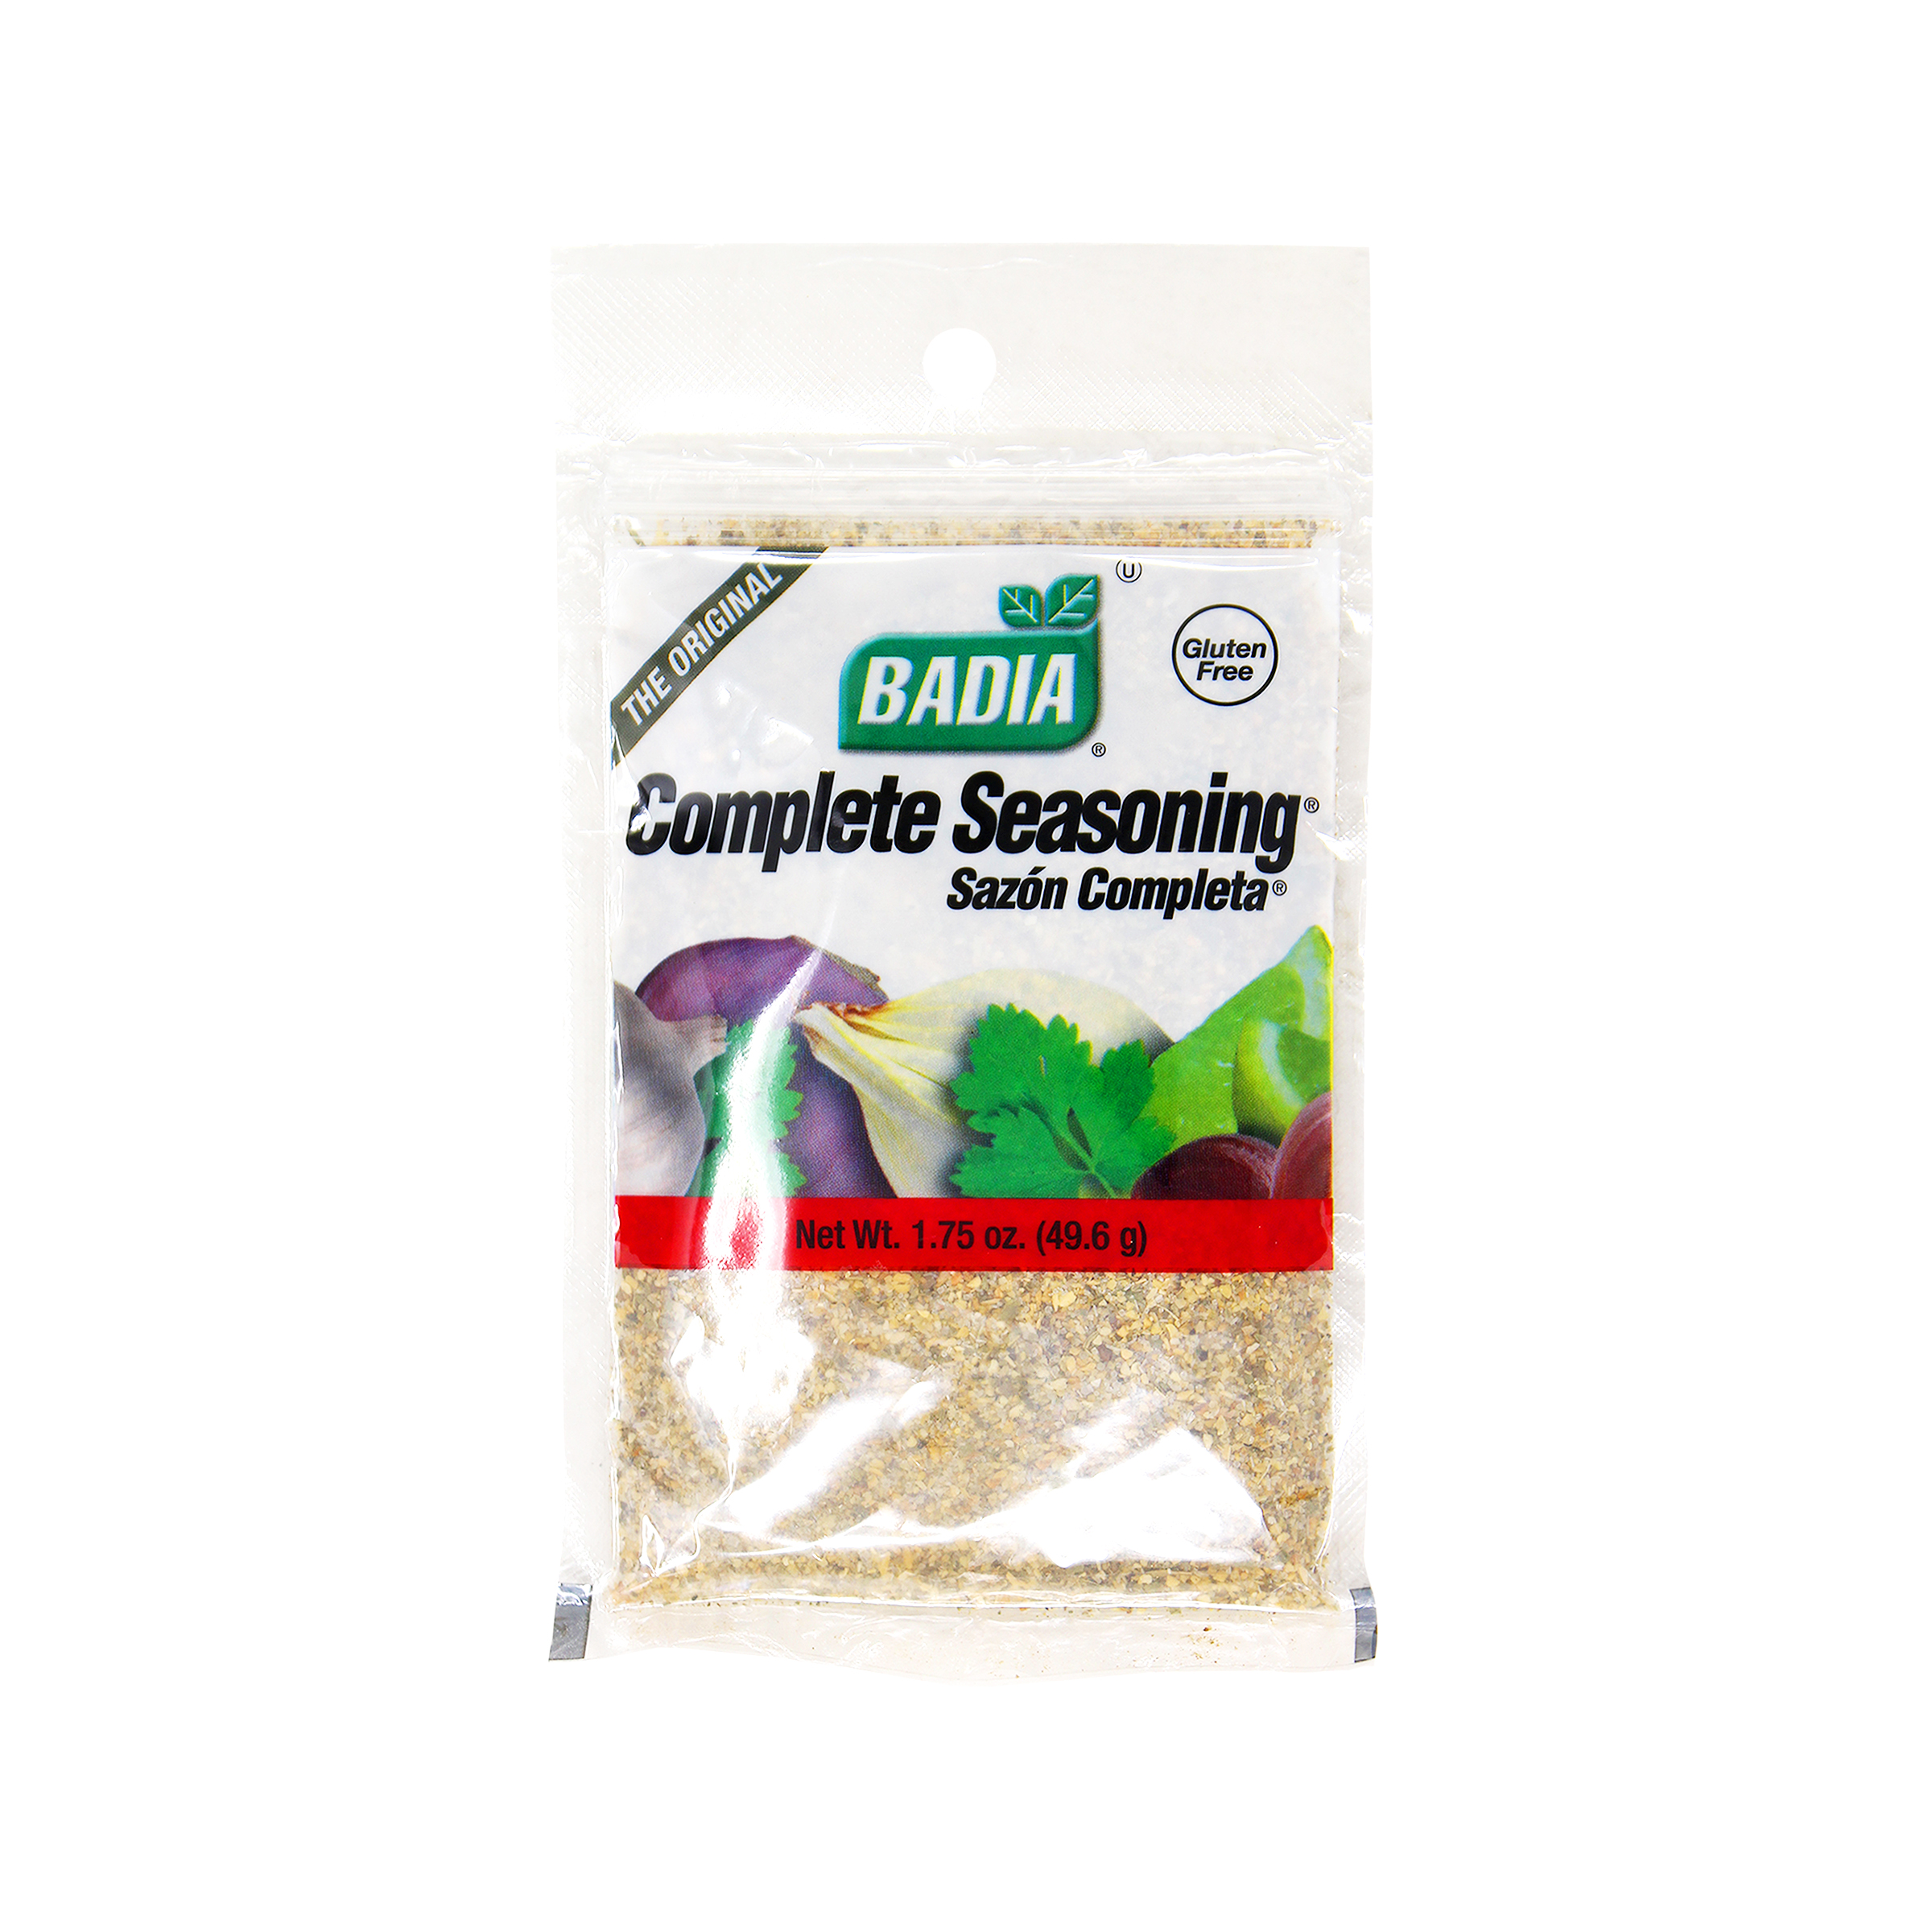 Badia Spices, Inc. - Badia Spices, Inc. Complete Seasoning really packs a  punch and is a good addition to almost any meal, fire up the grill and  #SpiceItUp!